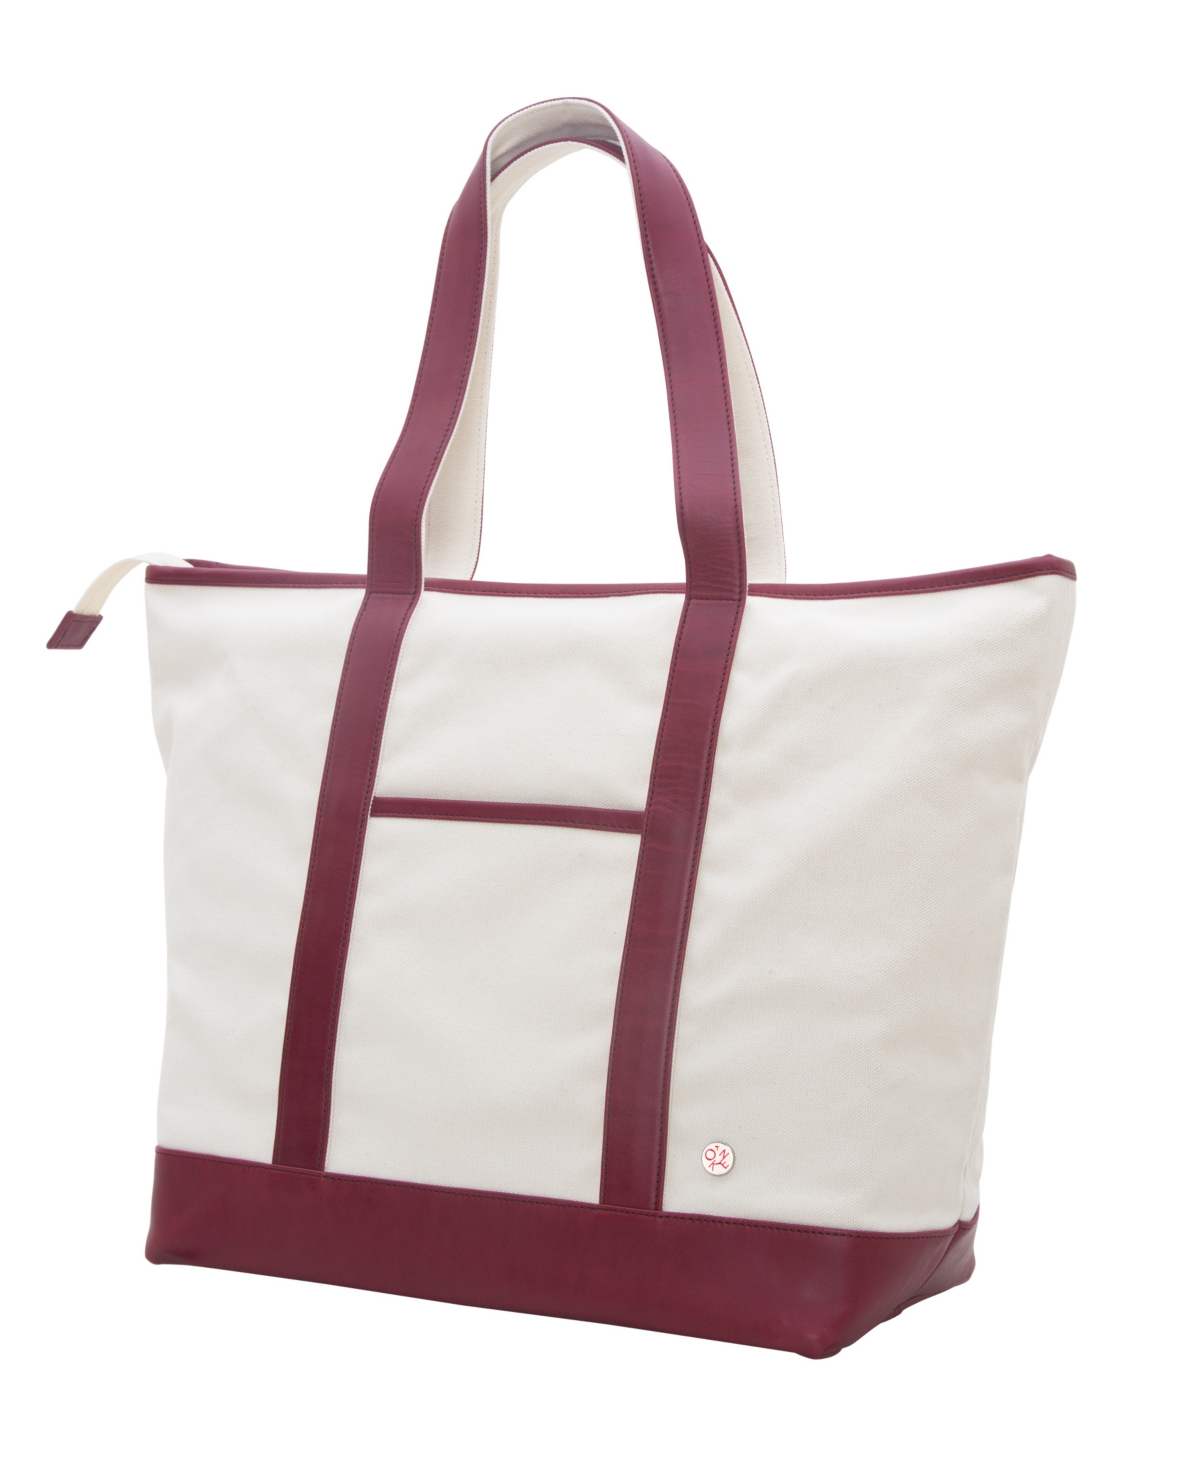 Greenpoint Large Tote Bag - Beige